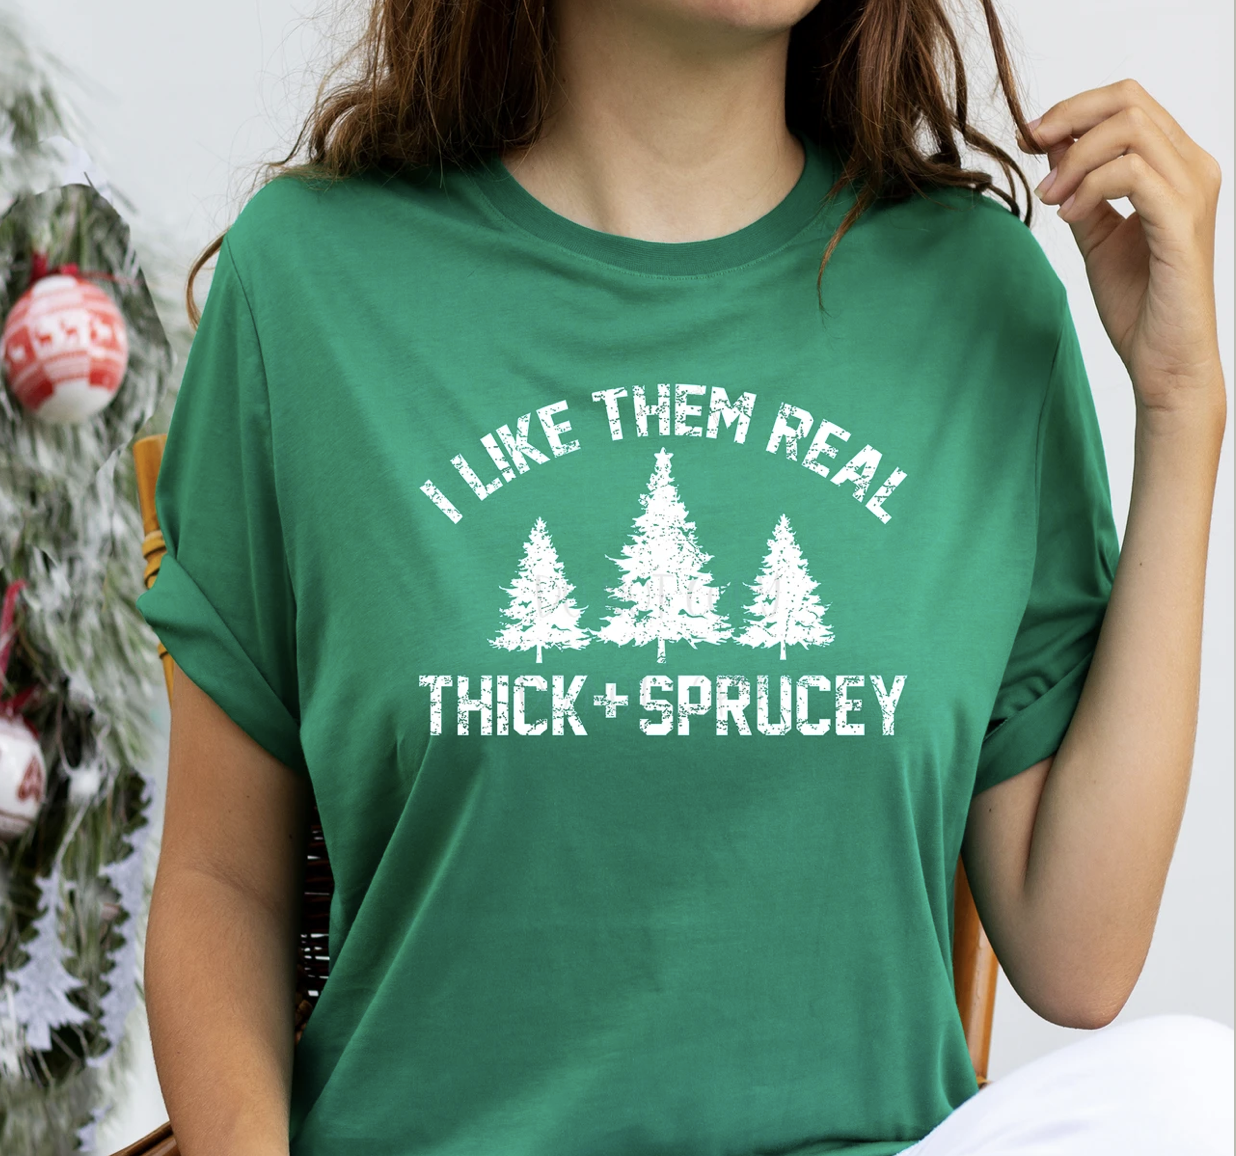 THICK + SPRUCEY TEE